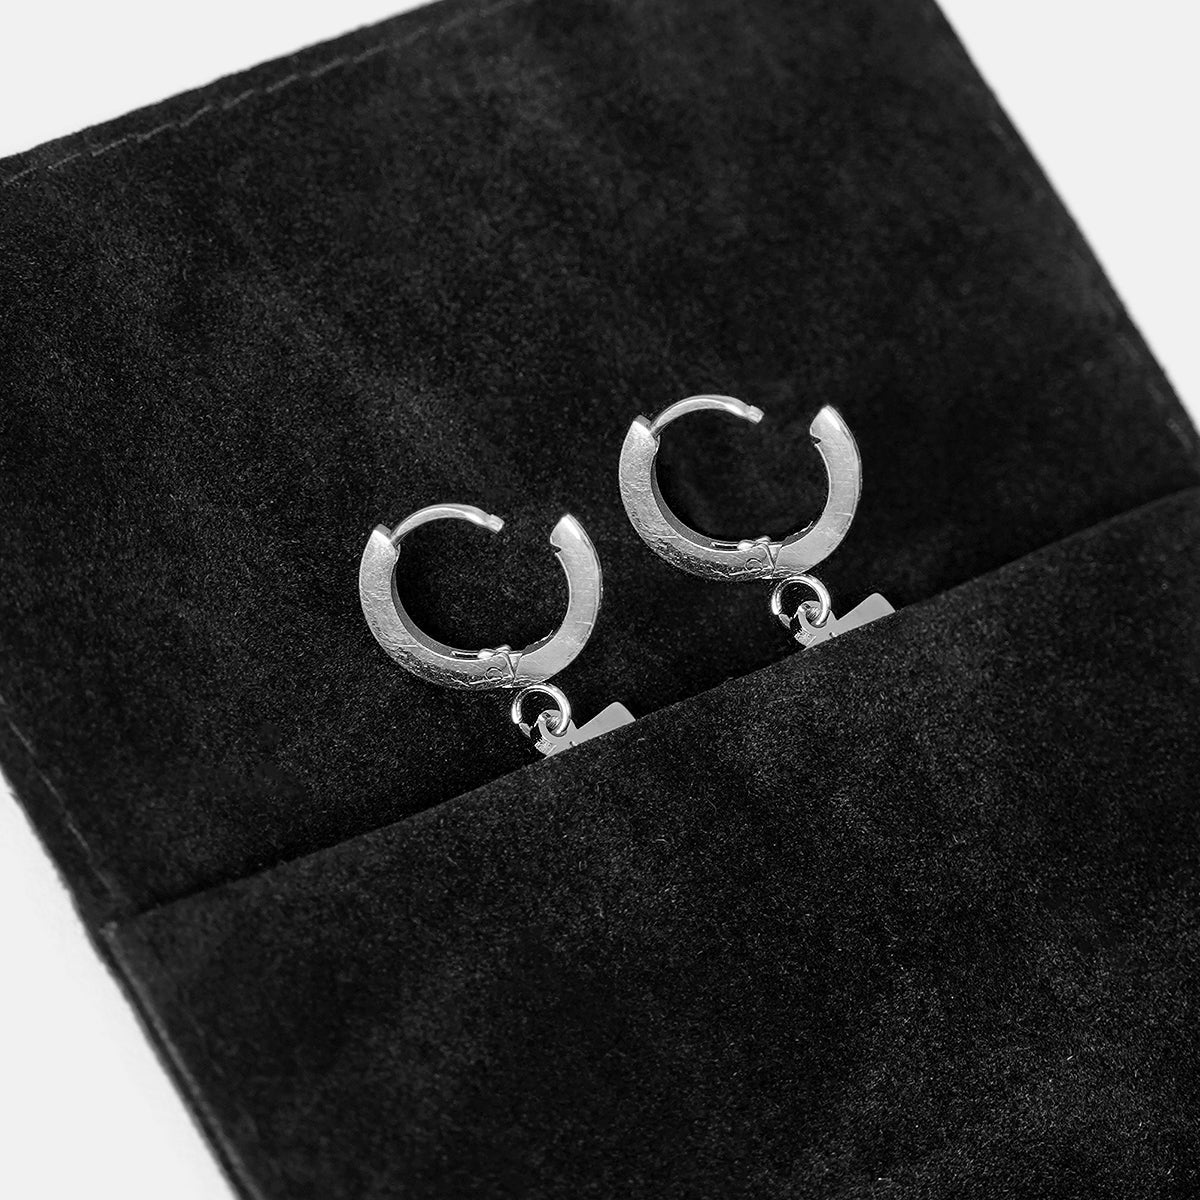 42 Number Earring - Stainless Steel